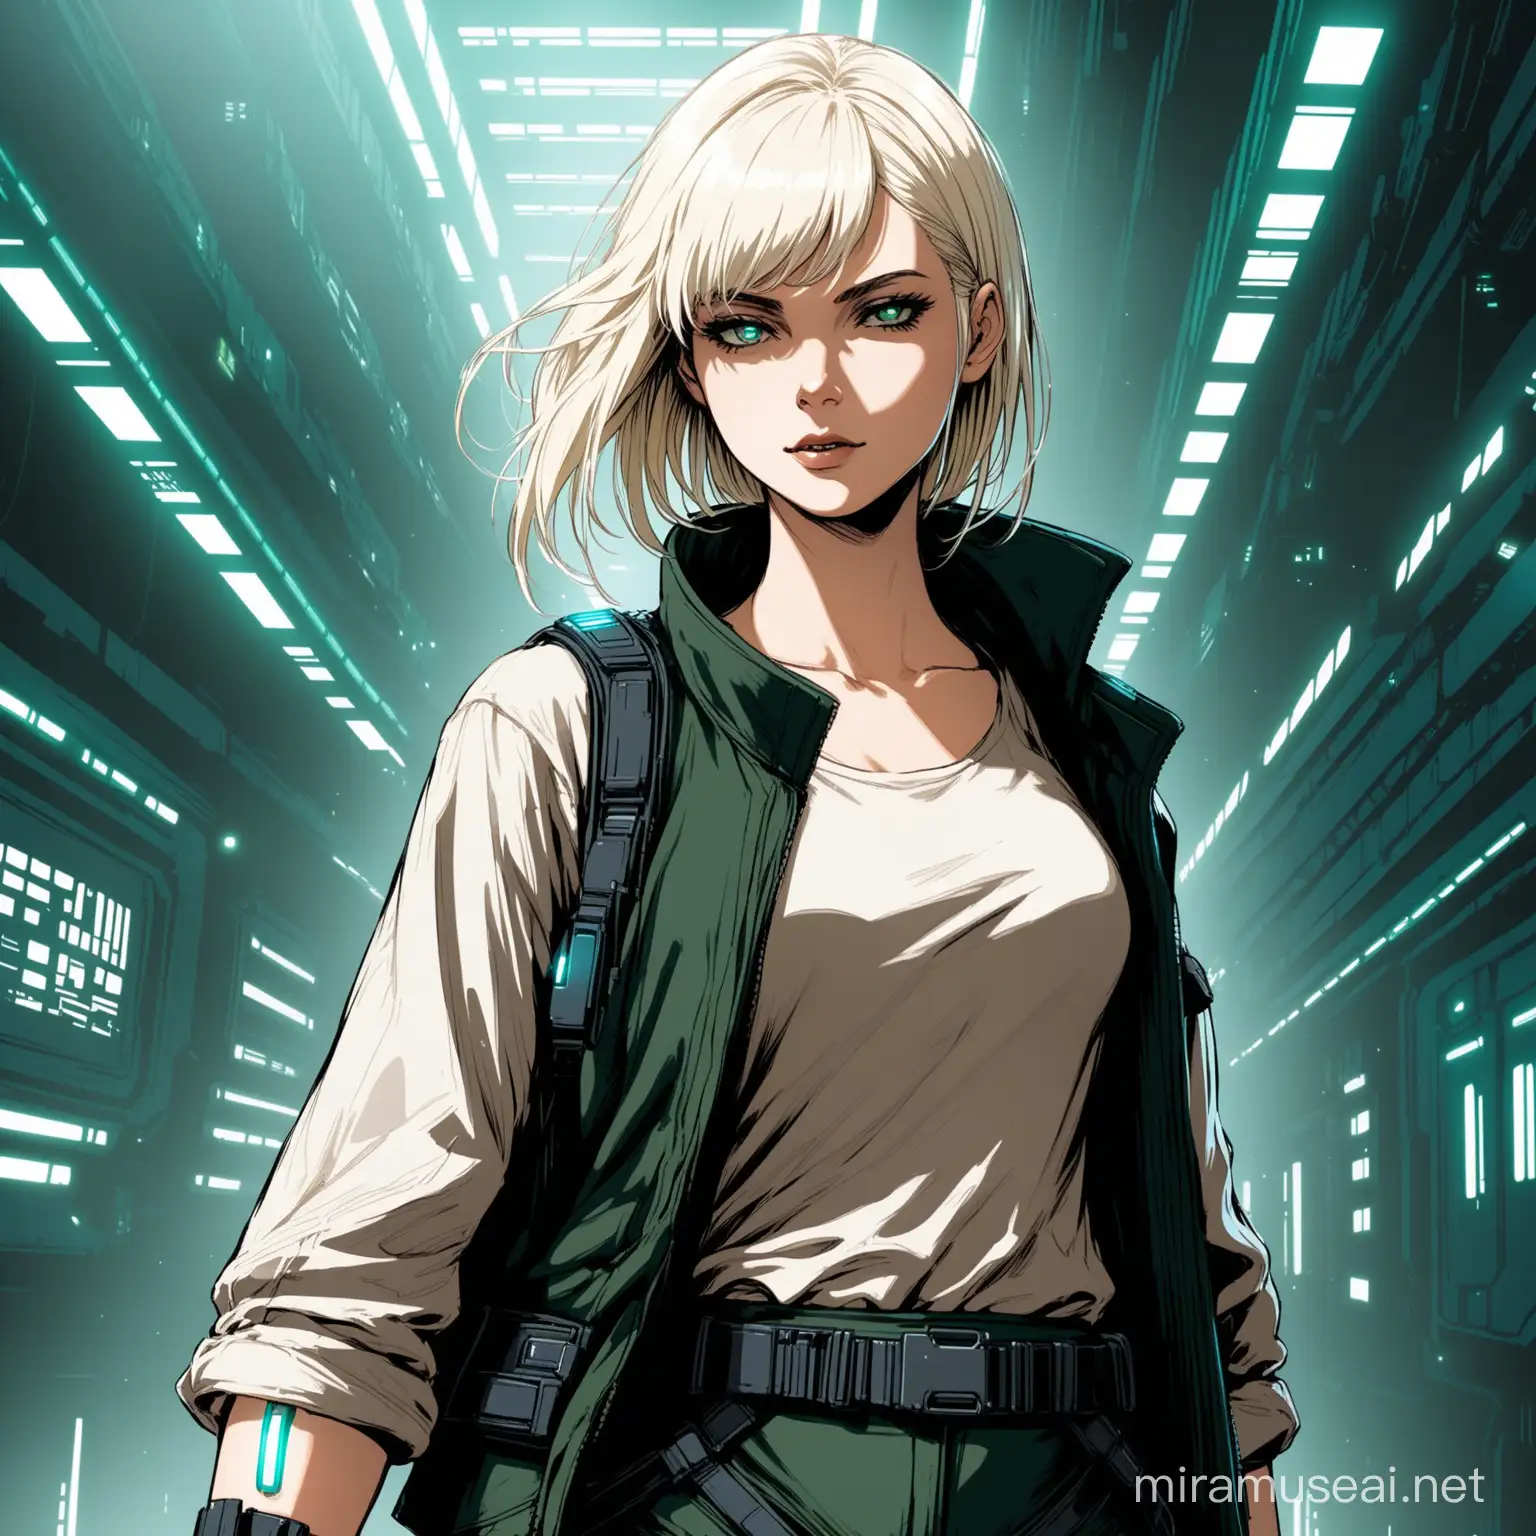 Bladerunner Replicant with Blond and White Hair in Civilian Clothes